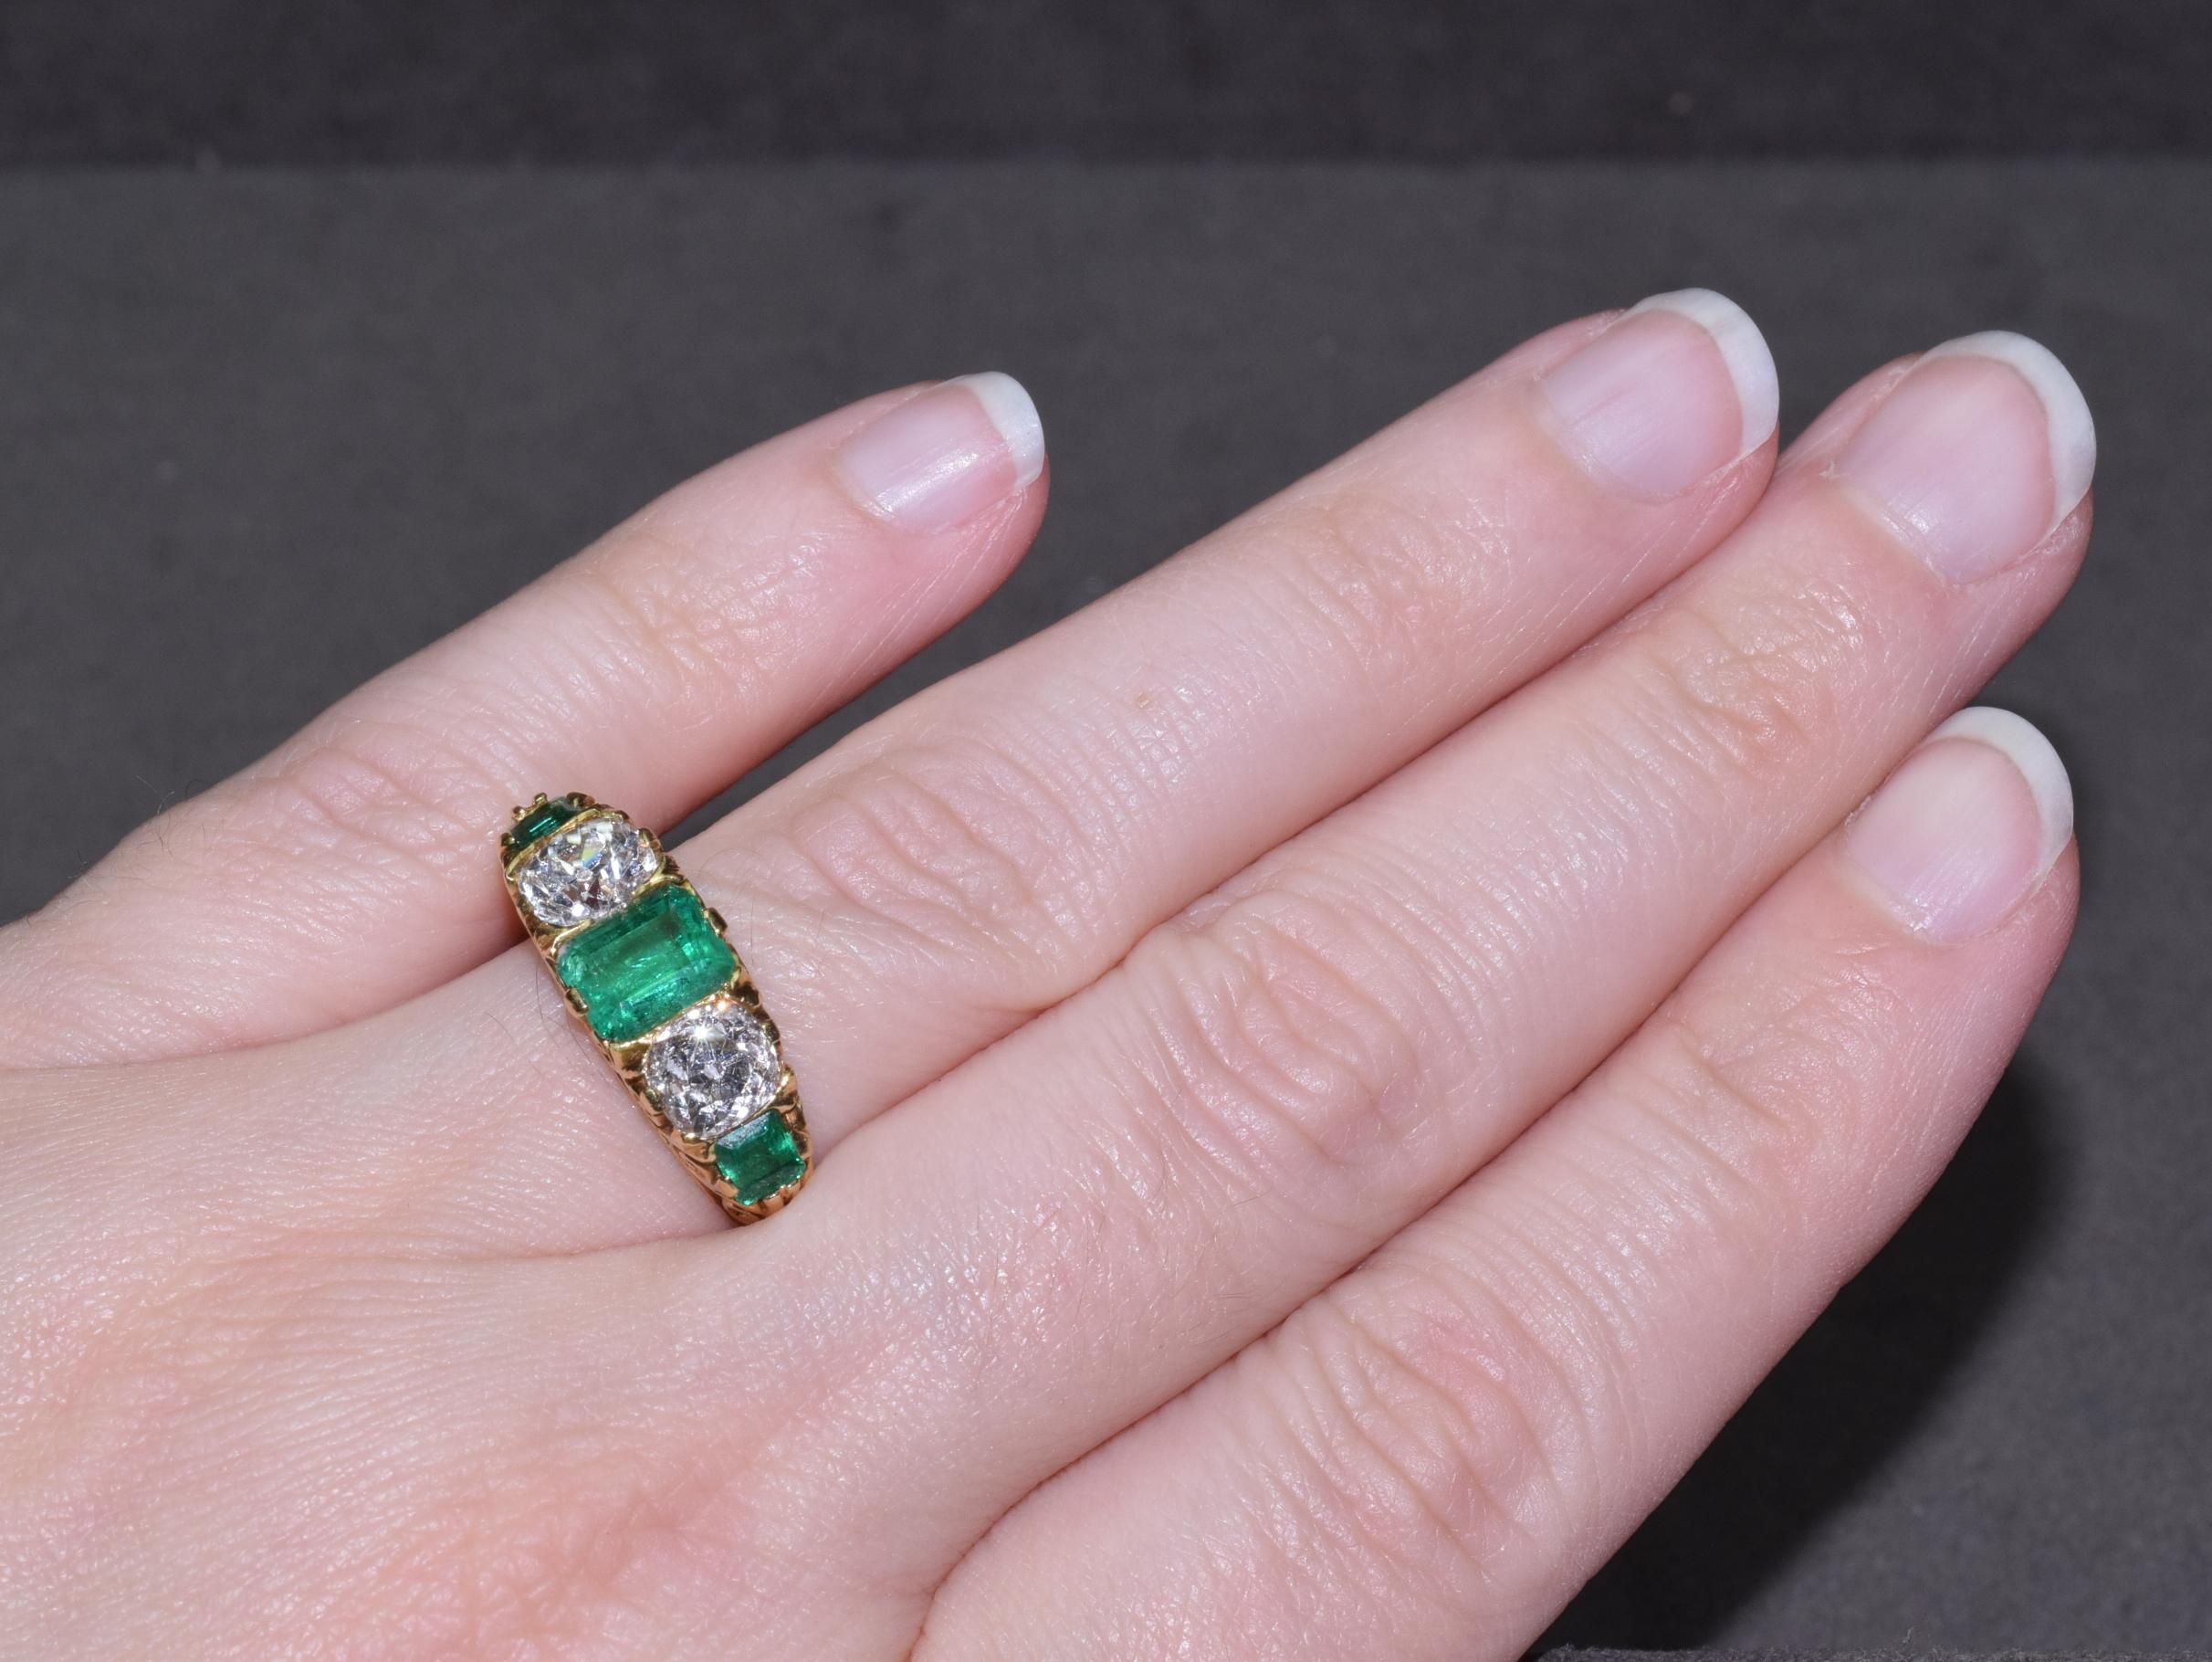 Set with an alternating graduated series of emerald-cut emeralds and old mine-cut diamonds, mounted in 18k gold

Total weight of the emeralds approximately 1.65 carats
Total weight of the diamonds approximately 1.50 carats
 
The ring is currently a